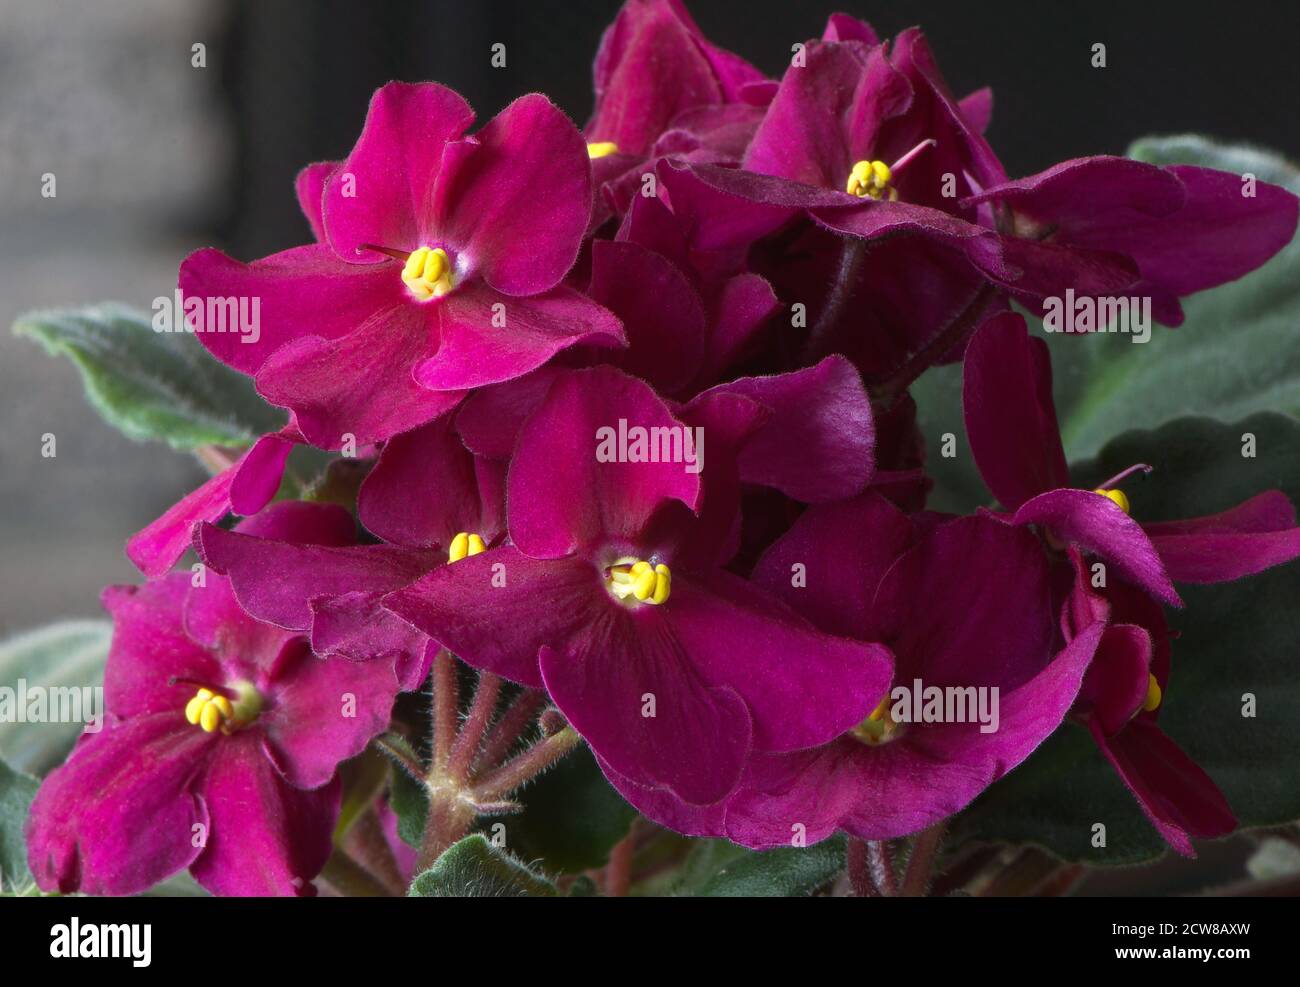 A dark pink African Violet plant in full bloom. Stock Photo